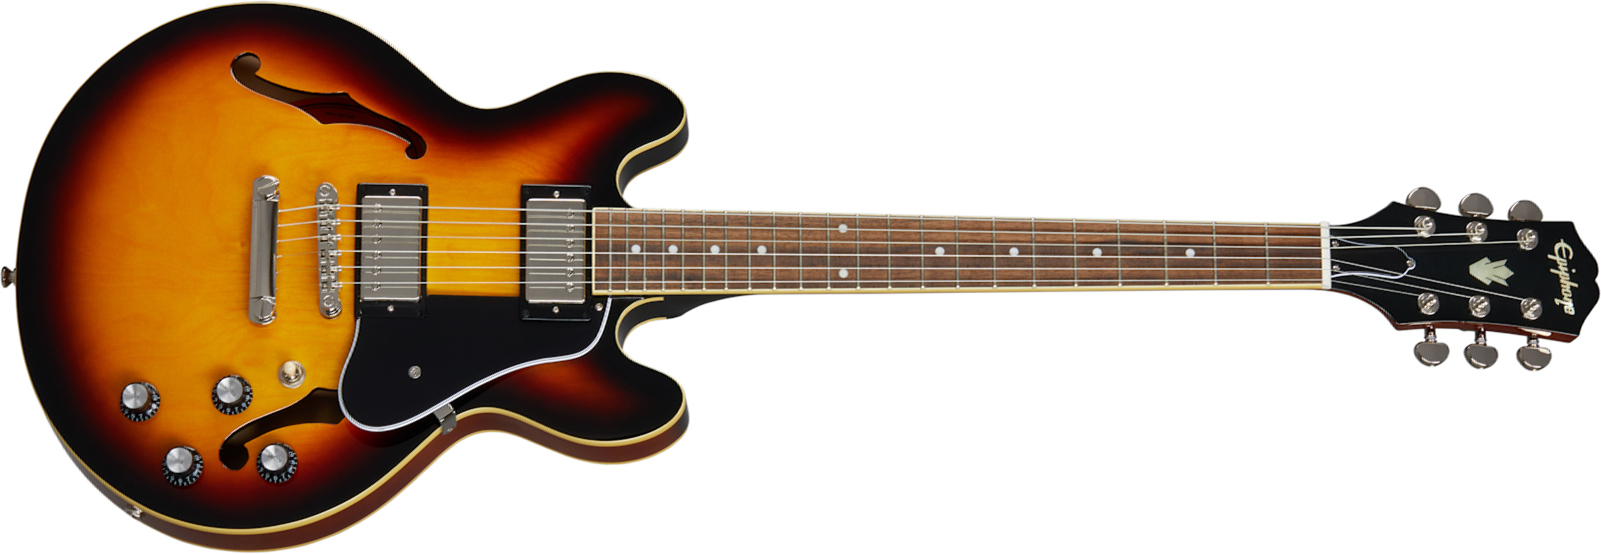 Epiphone Es-339 Inspired By Gibson 2020 2h Ht Rw - Vintage Sunburst - Semi-Hollow E-Gitarre - Main picture